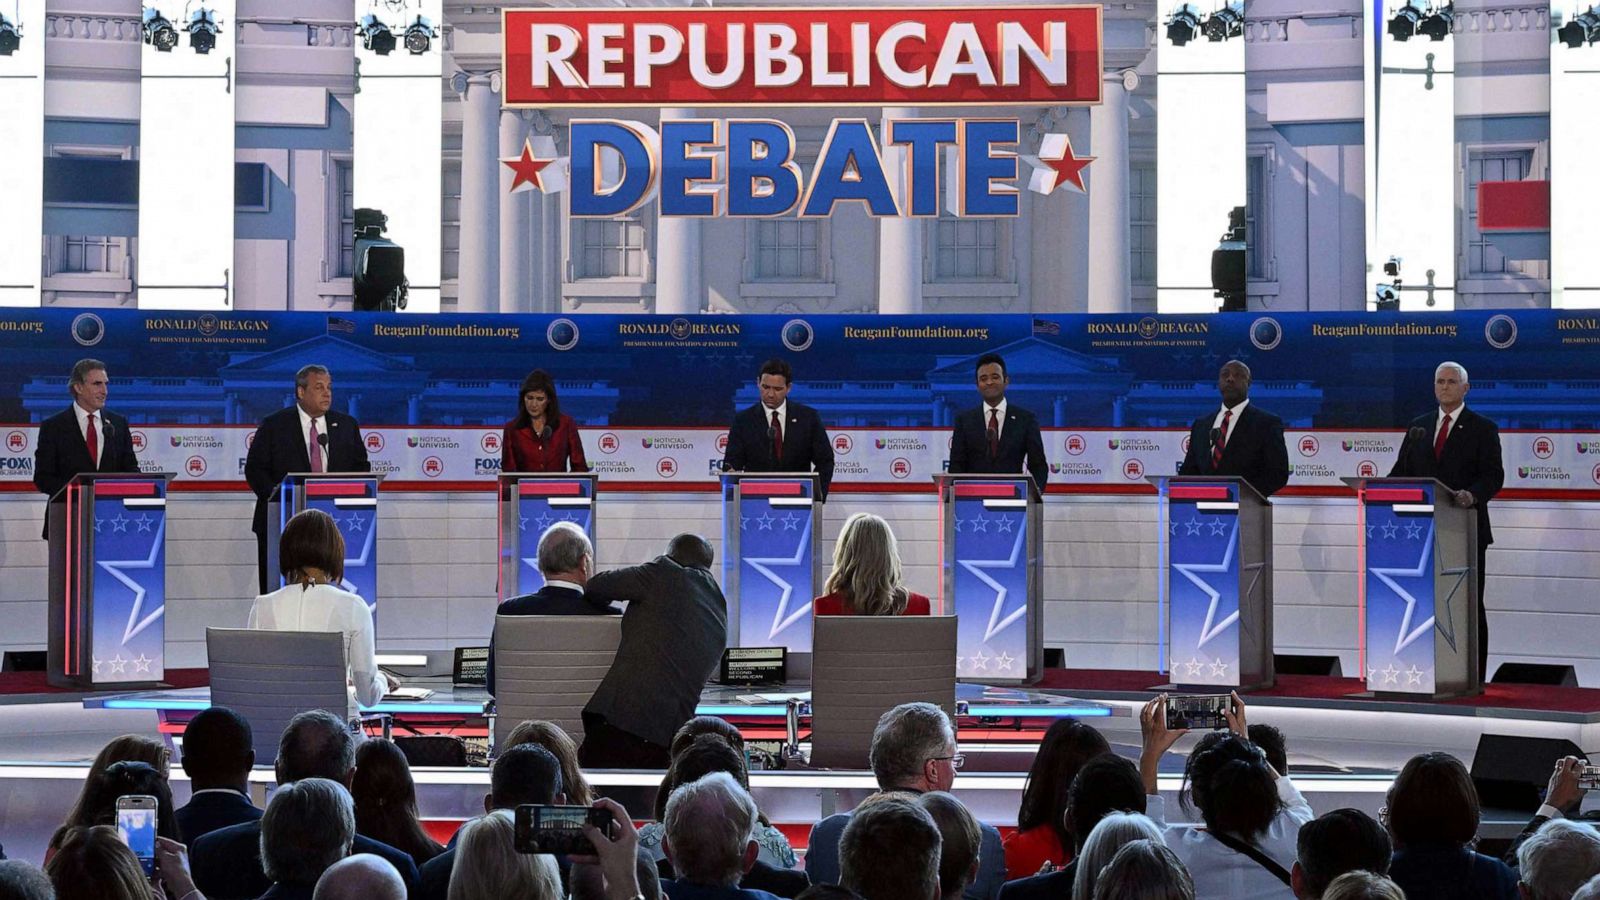 Republican debate highlights and analysis Candidates squabble in Simi